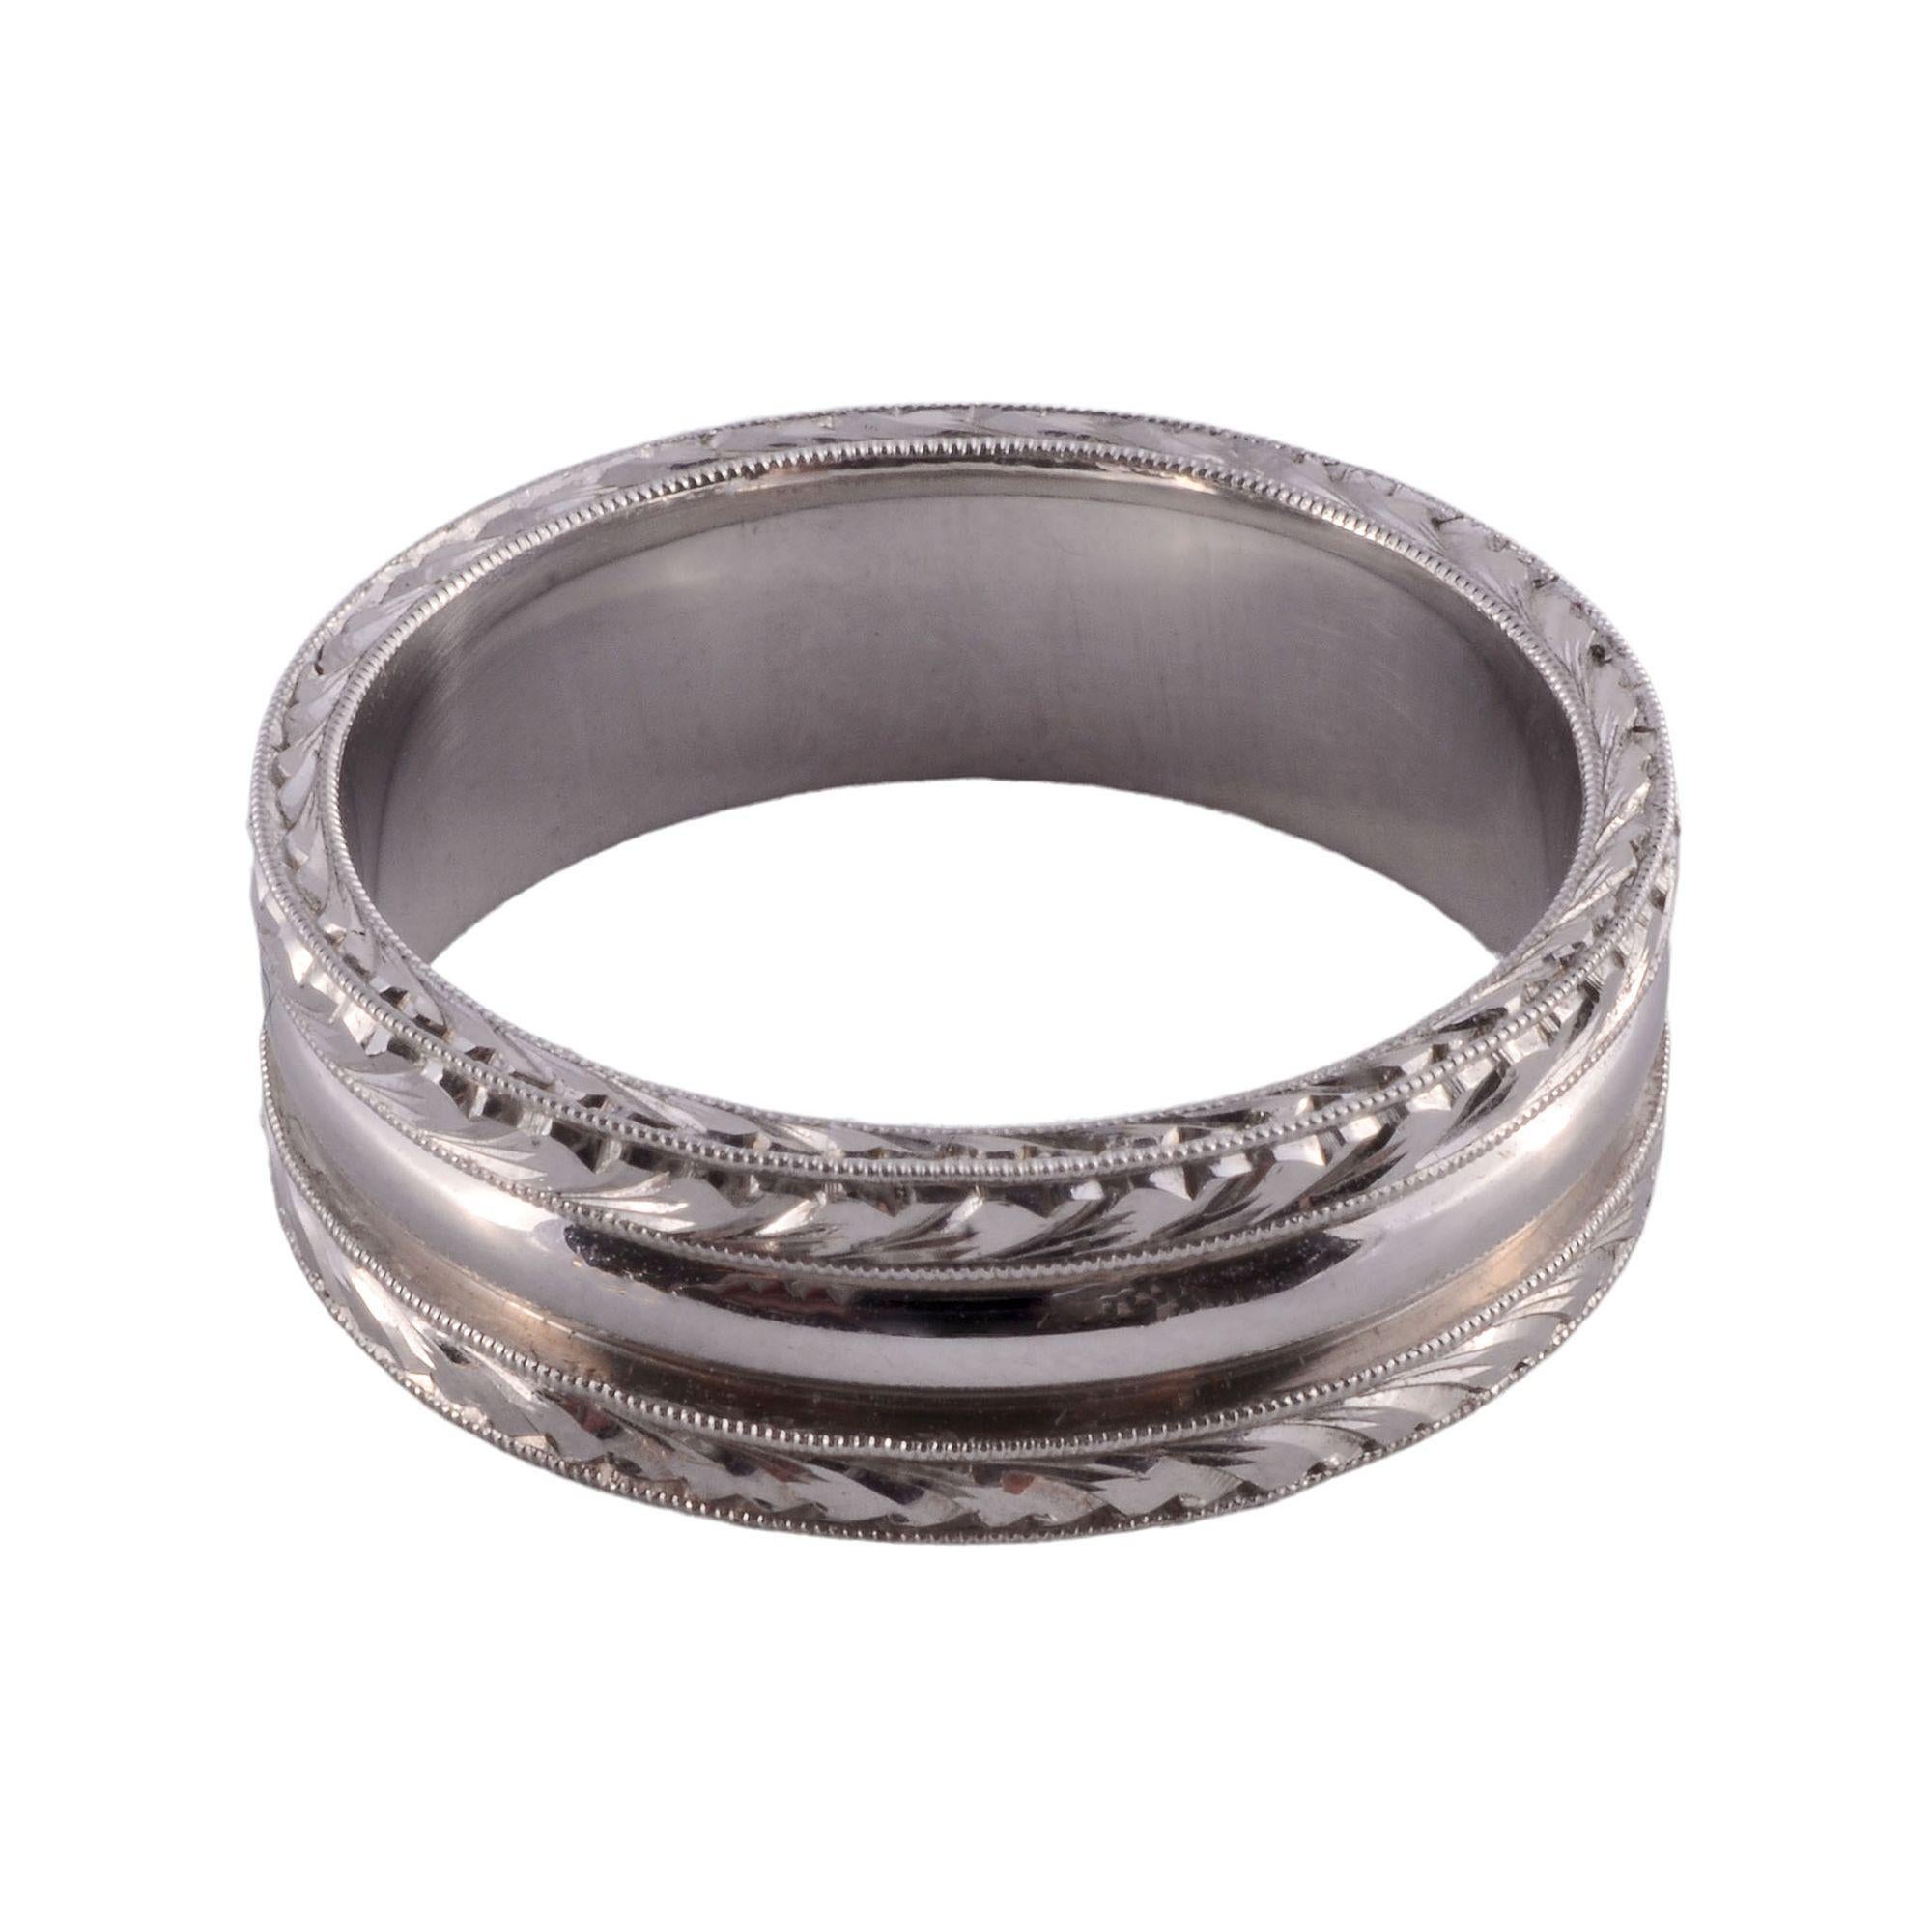 Estate Kirk Kara 18 karat white gold wedding band. This fine wedding band features deep chase work and hand engraving with excellent workmanship. This 18KW wedding band is a size 10. [KIMH 193A P]